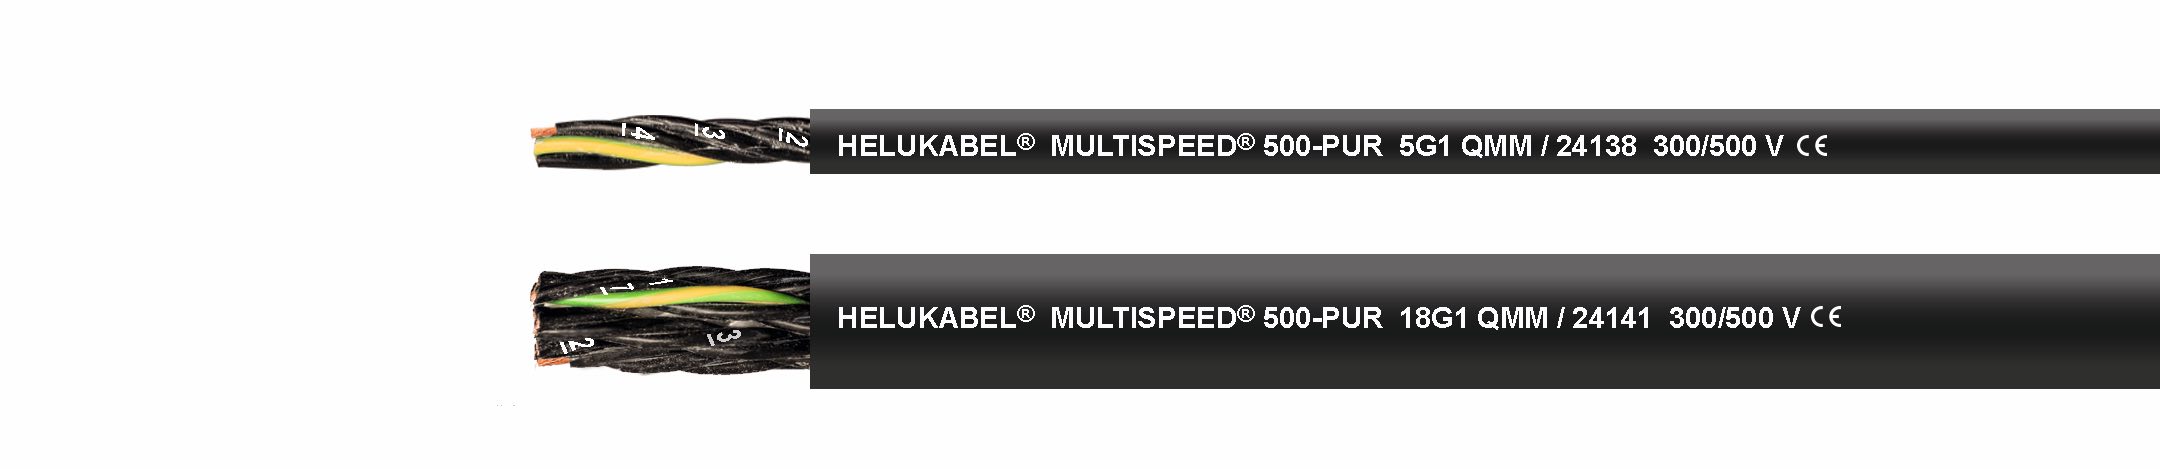 Cable Helukabel: MULTISPEED 500-PUR (PUR)